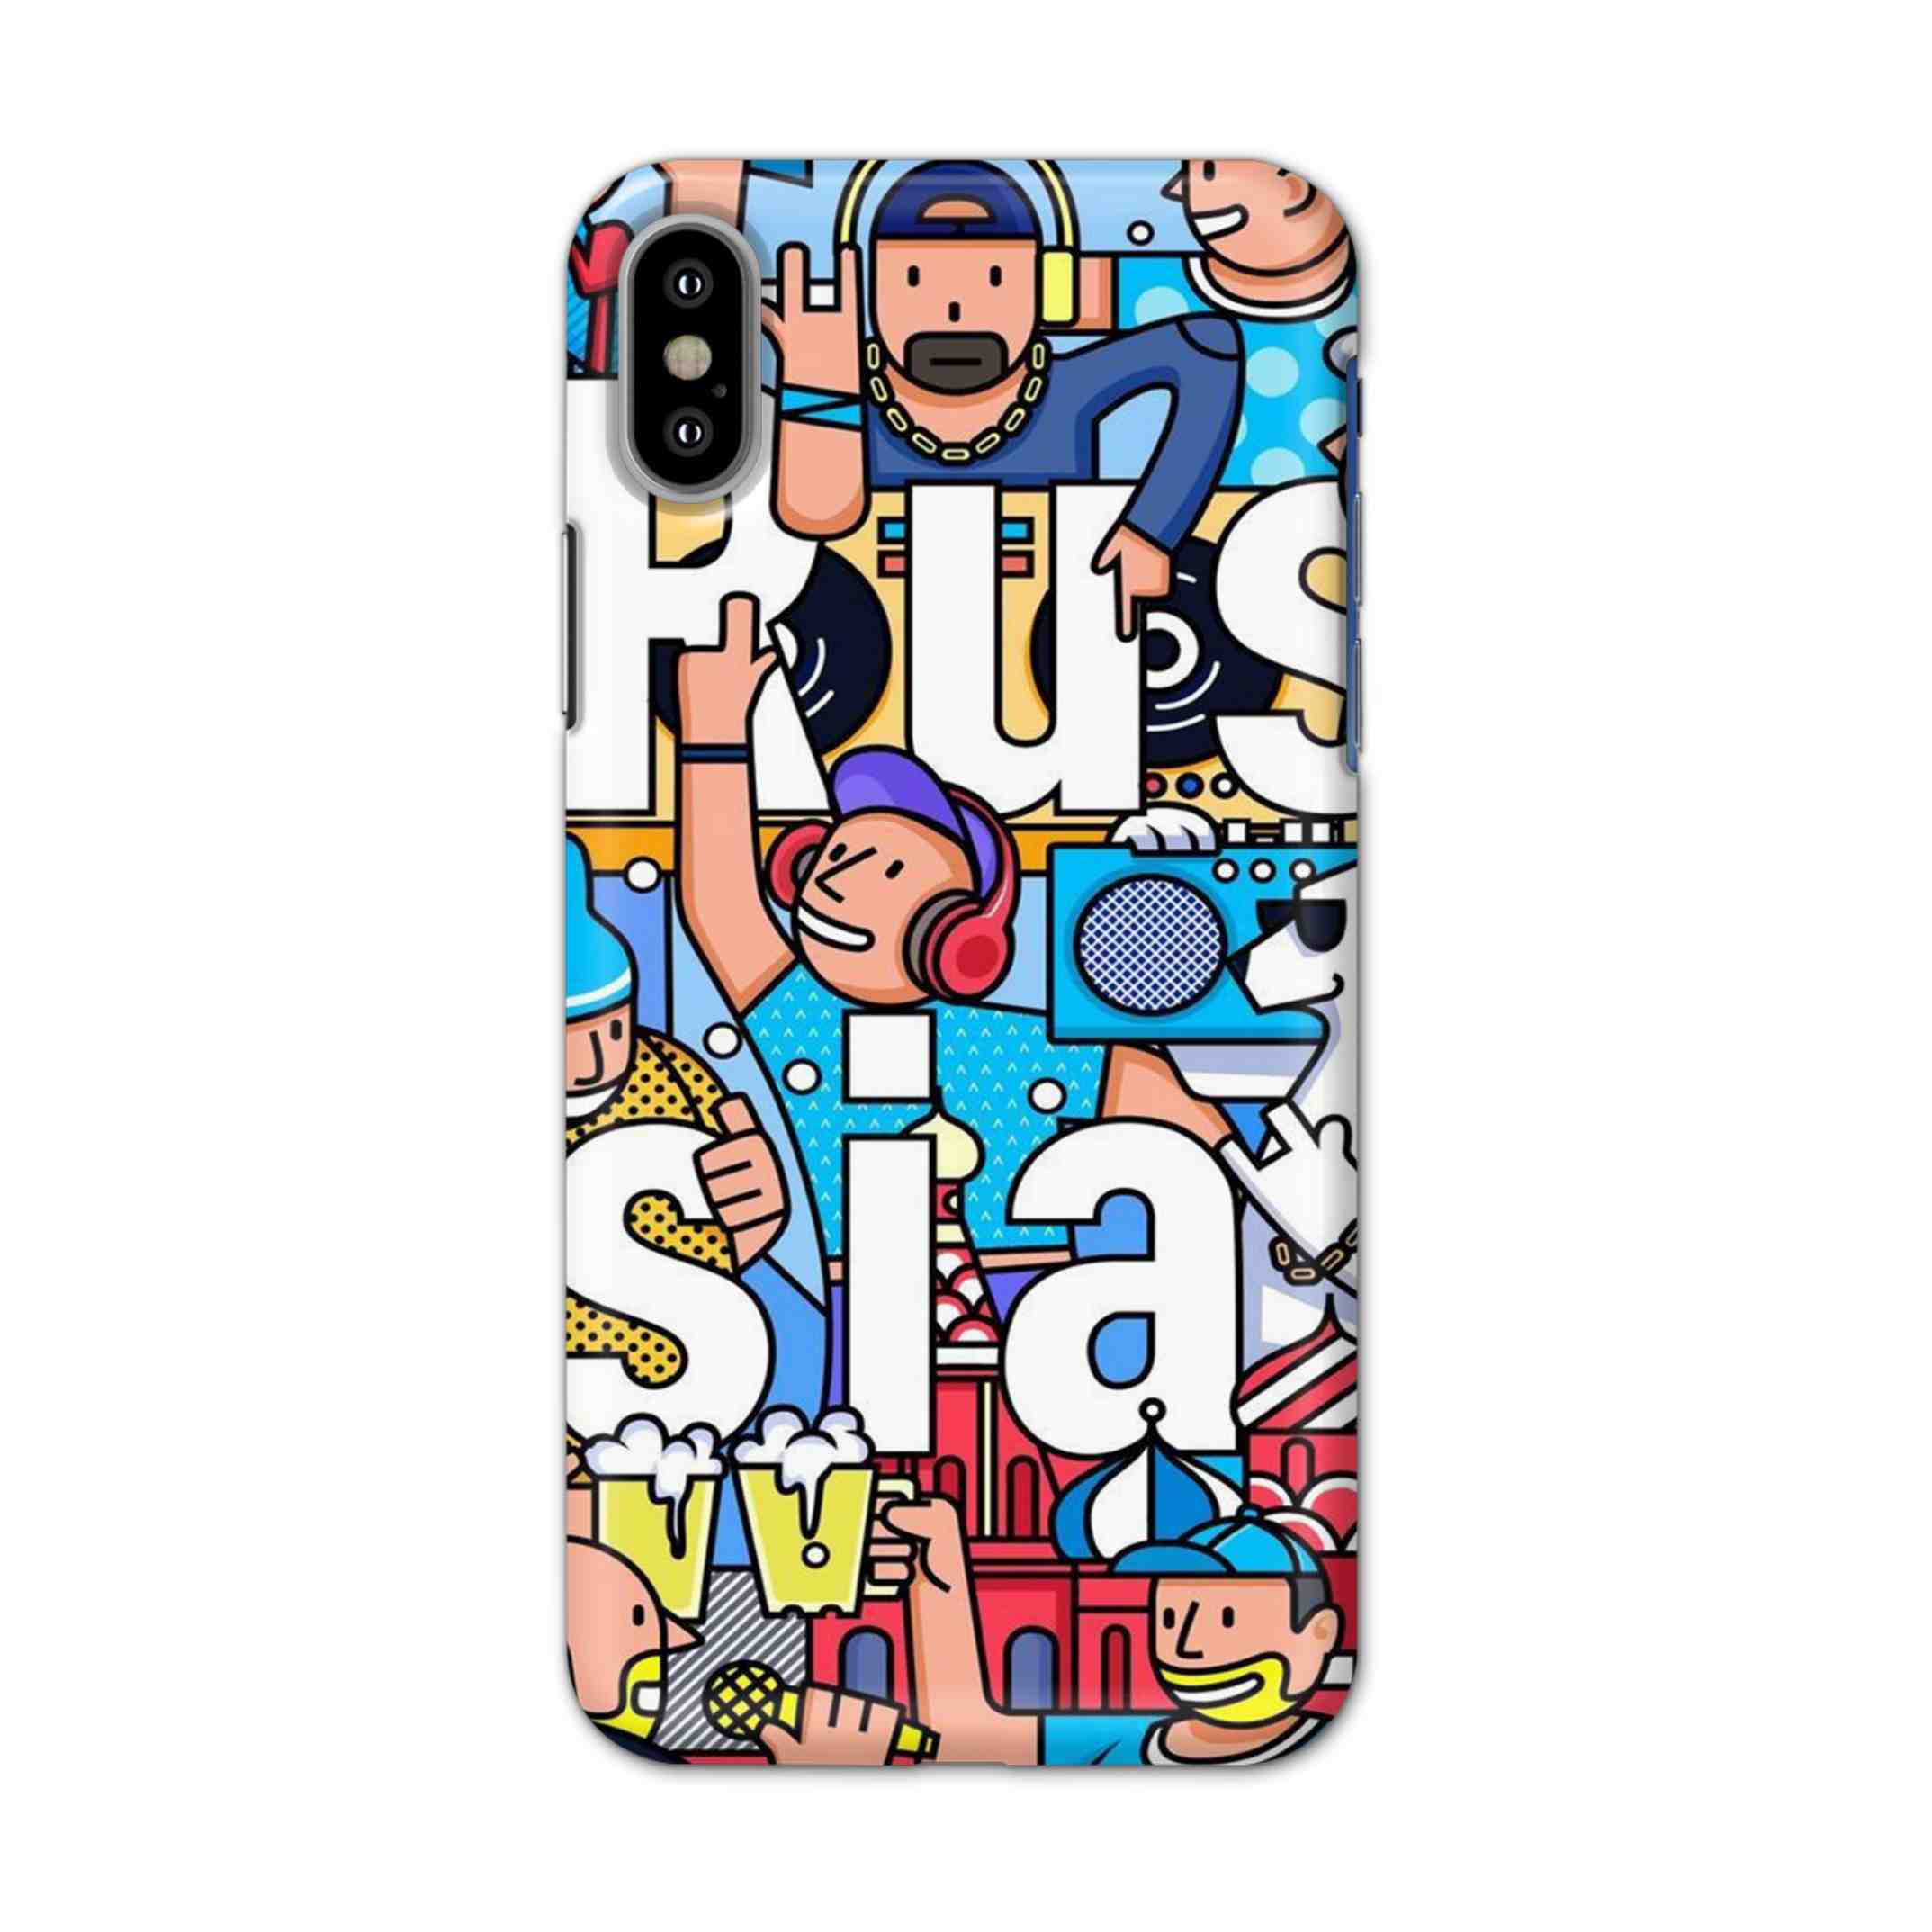 Buy Russia Hard Back Mobile Phone Case/Cover For iPhone X Online